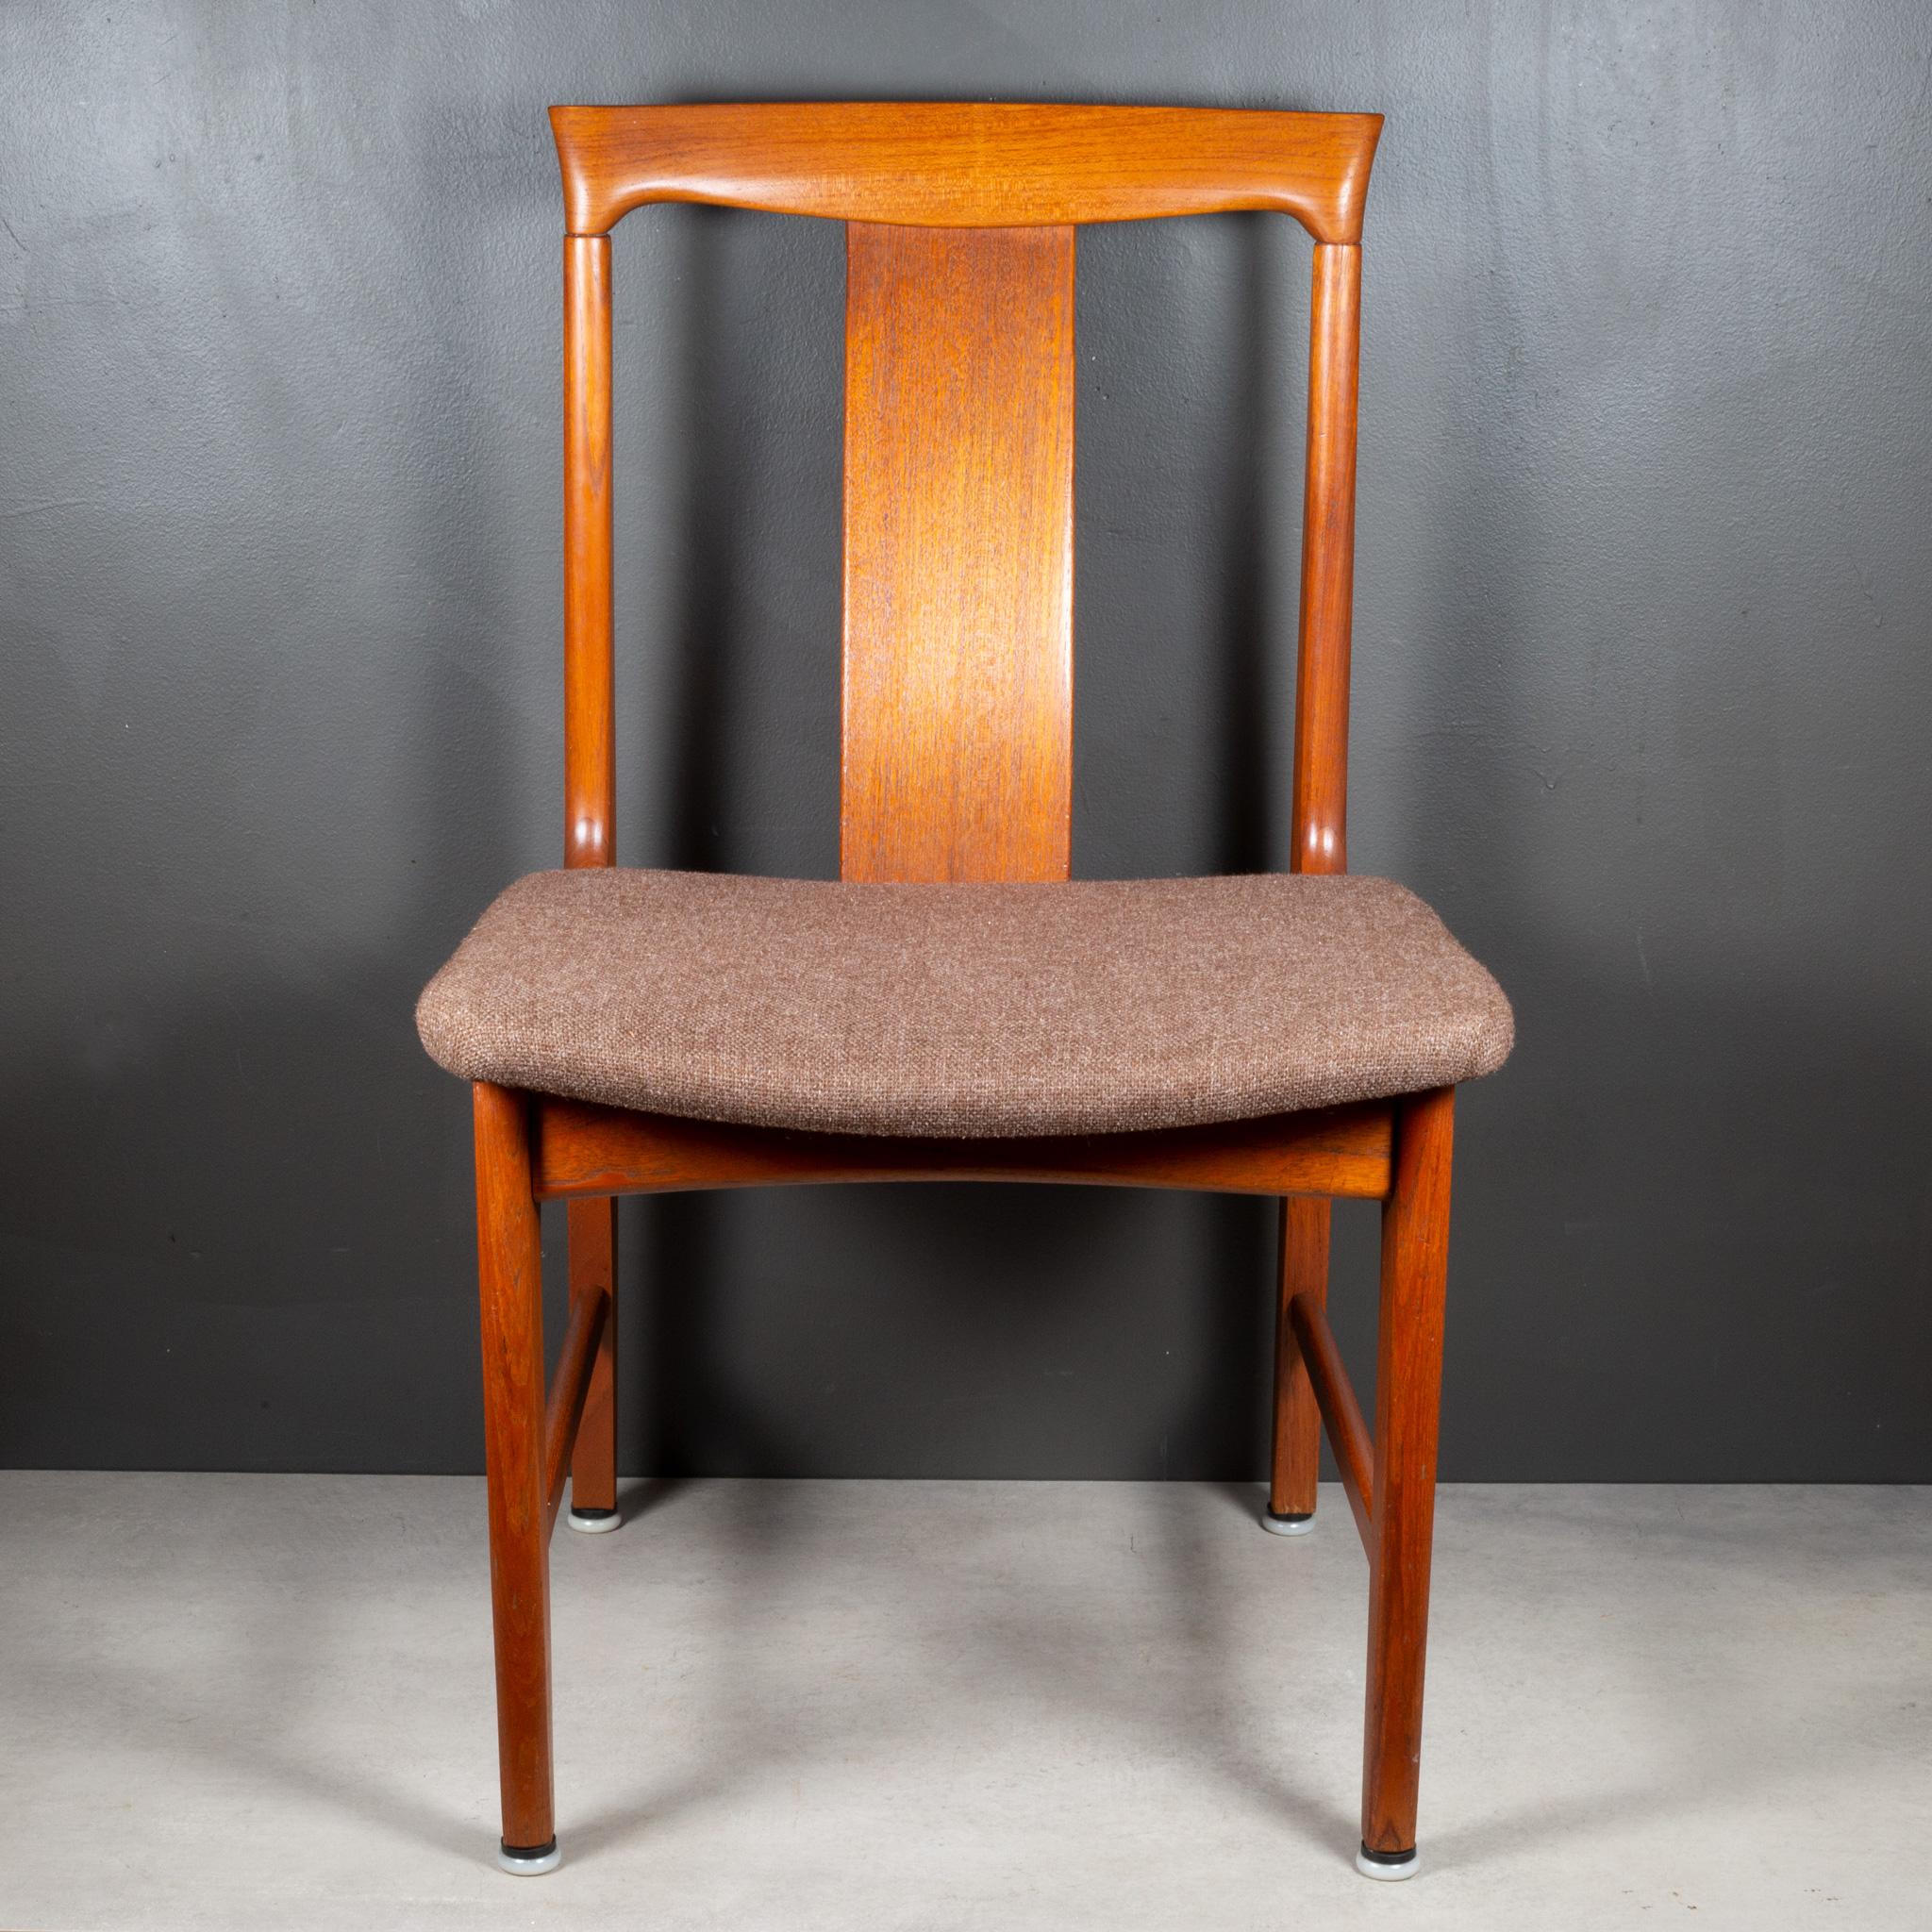 20th Century Midcentury Japanese Sculpted Teak Dining Chairs C.1960 For Sale